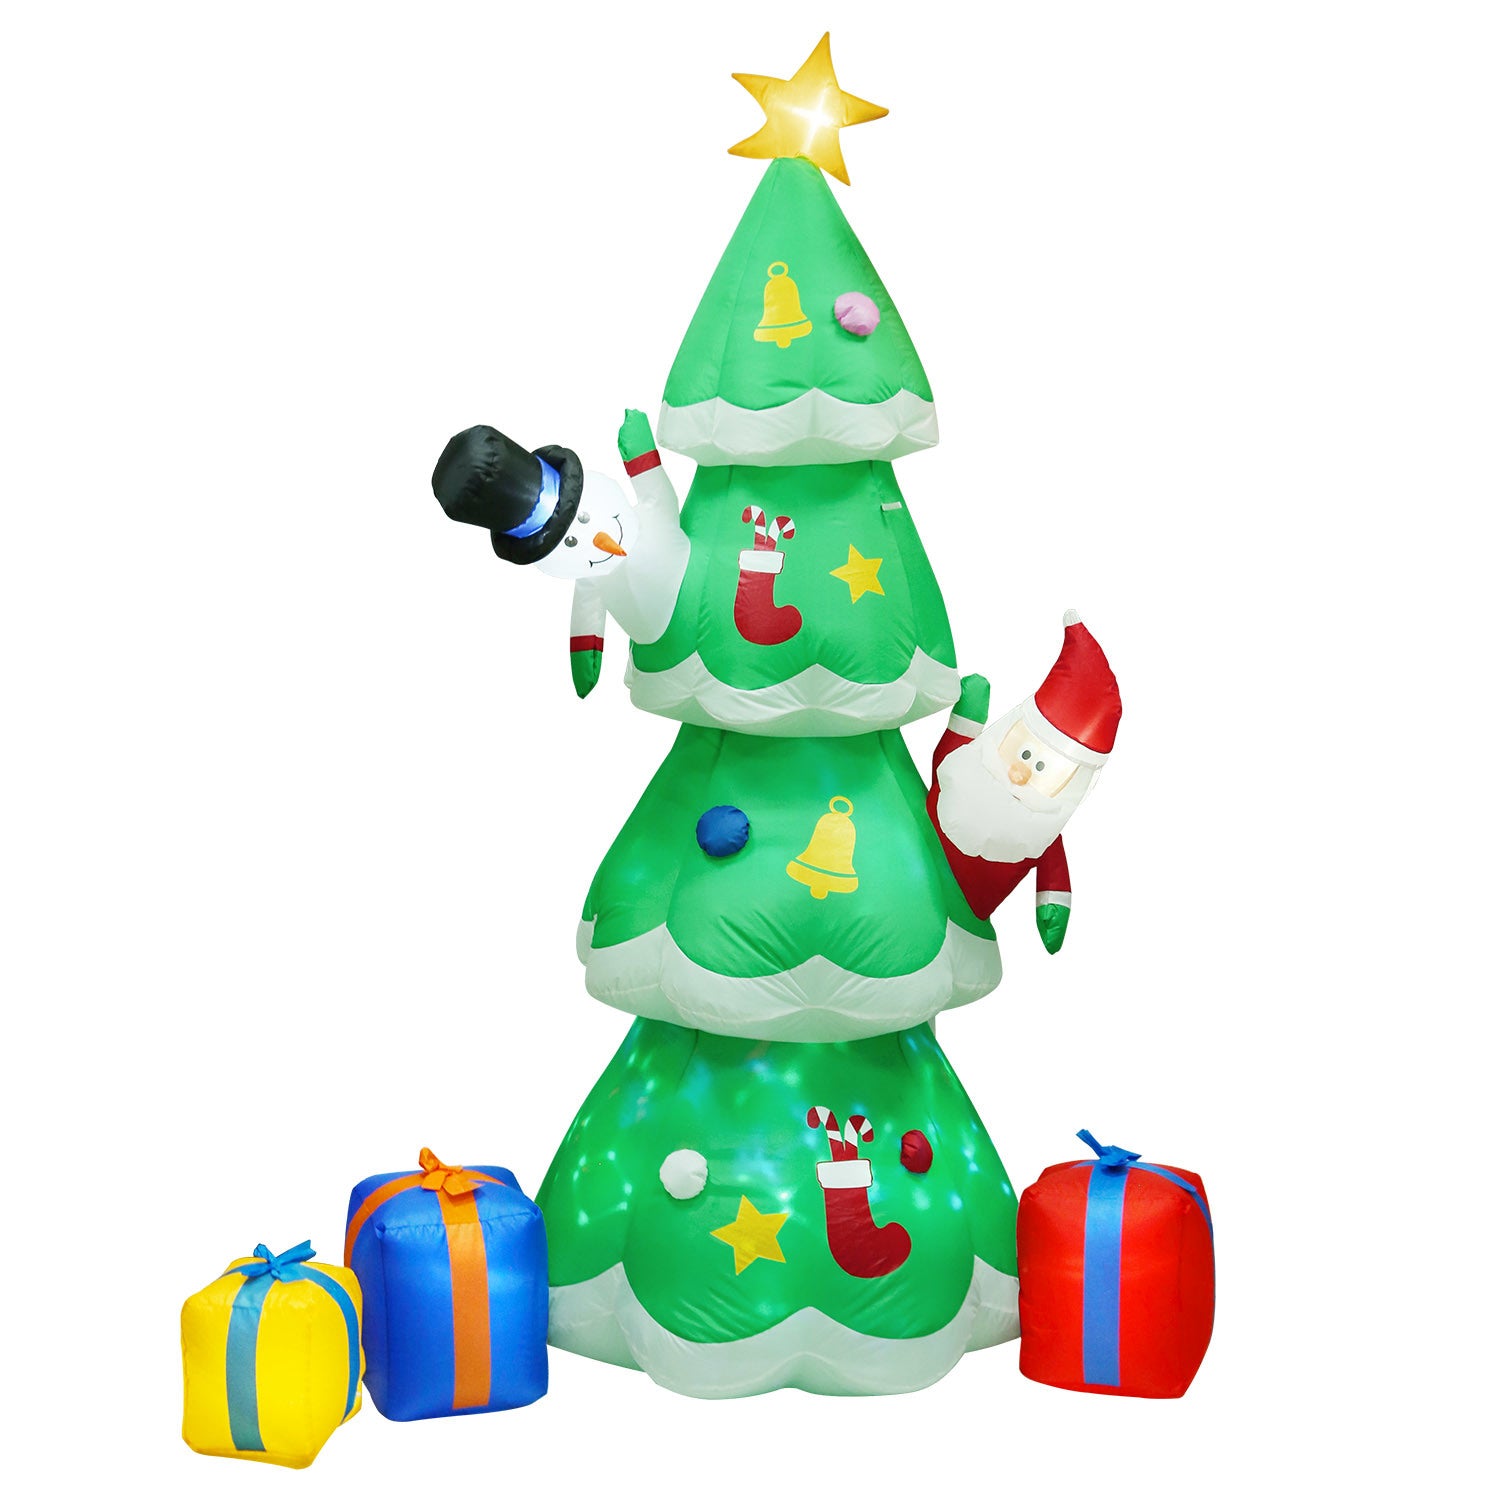 Inflatable 6.89FT Christmas Inflatable Outdoor Decoration with Christmas Tree Gift Box Santa Claus Blow Up Yard Decoration with LED Light Built-in Air Blower for Winter Holiday Xmas Garden decorated with Santa Claus.